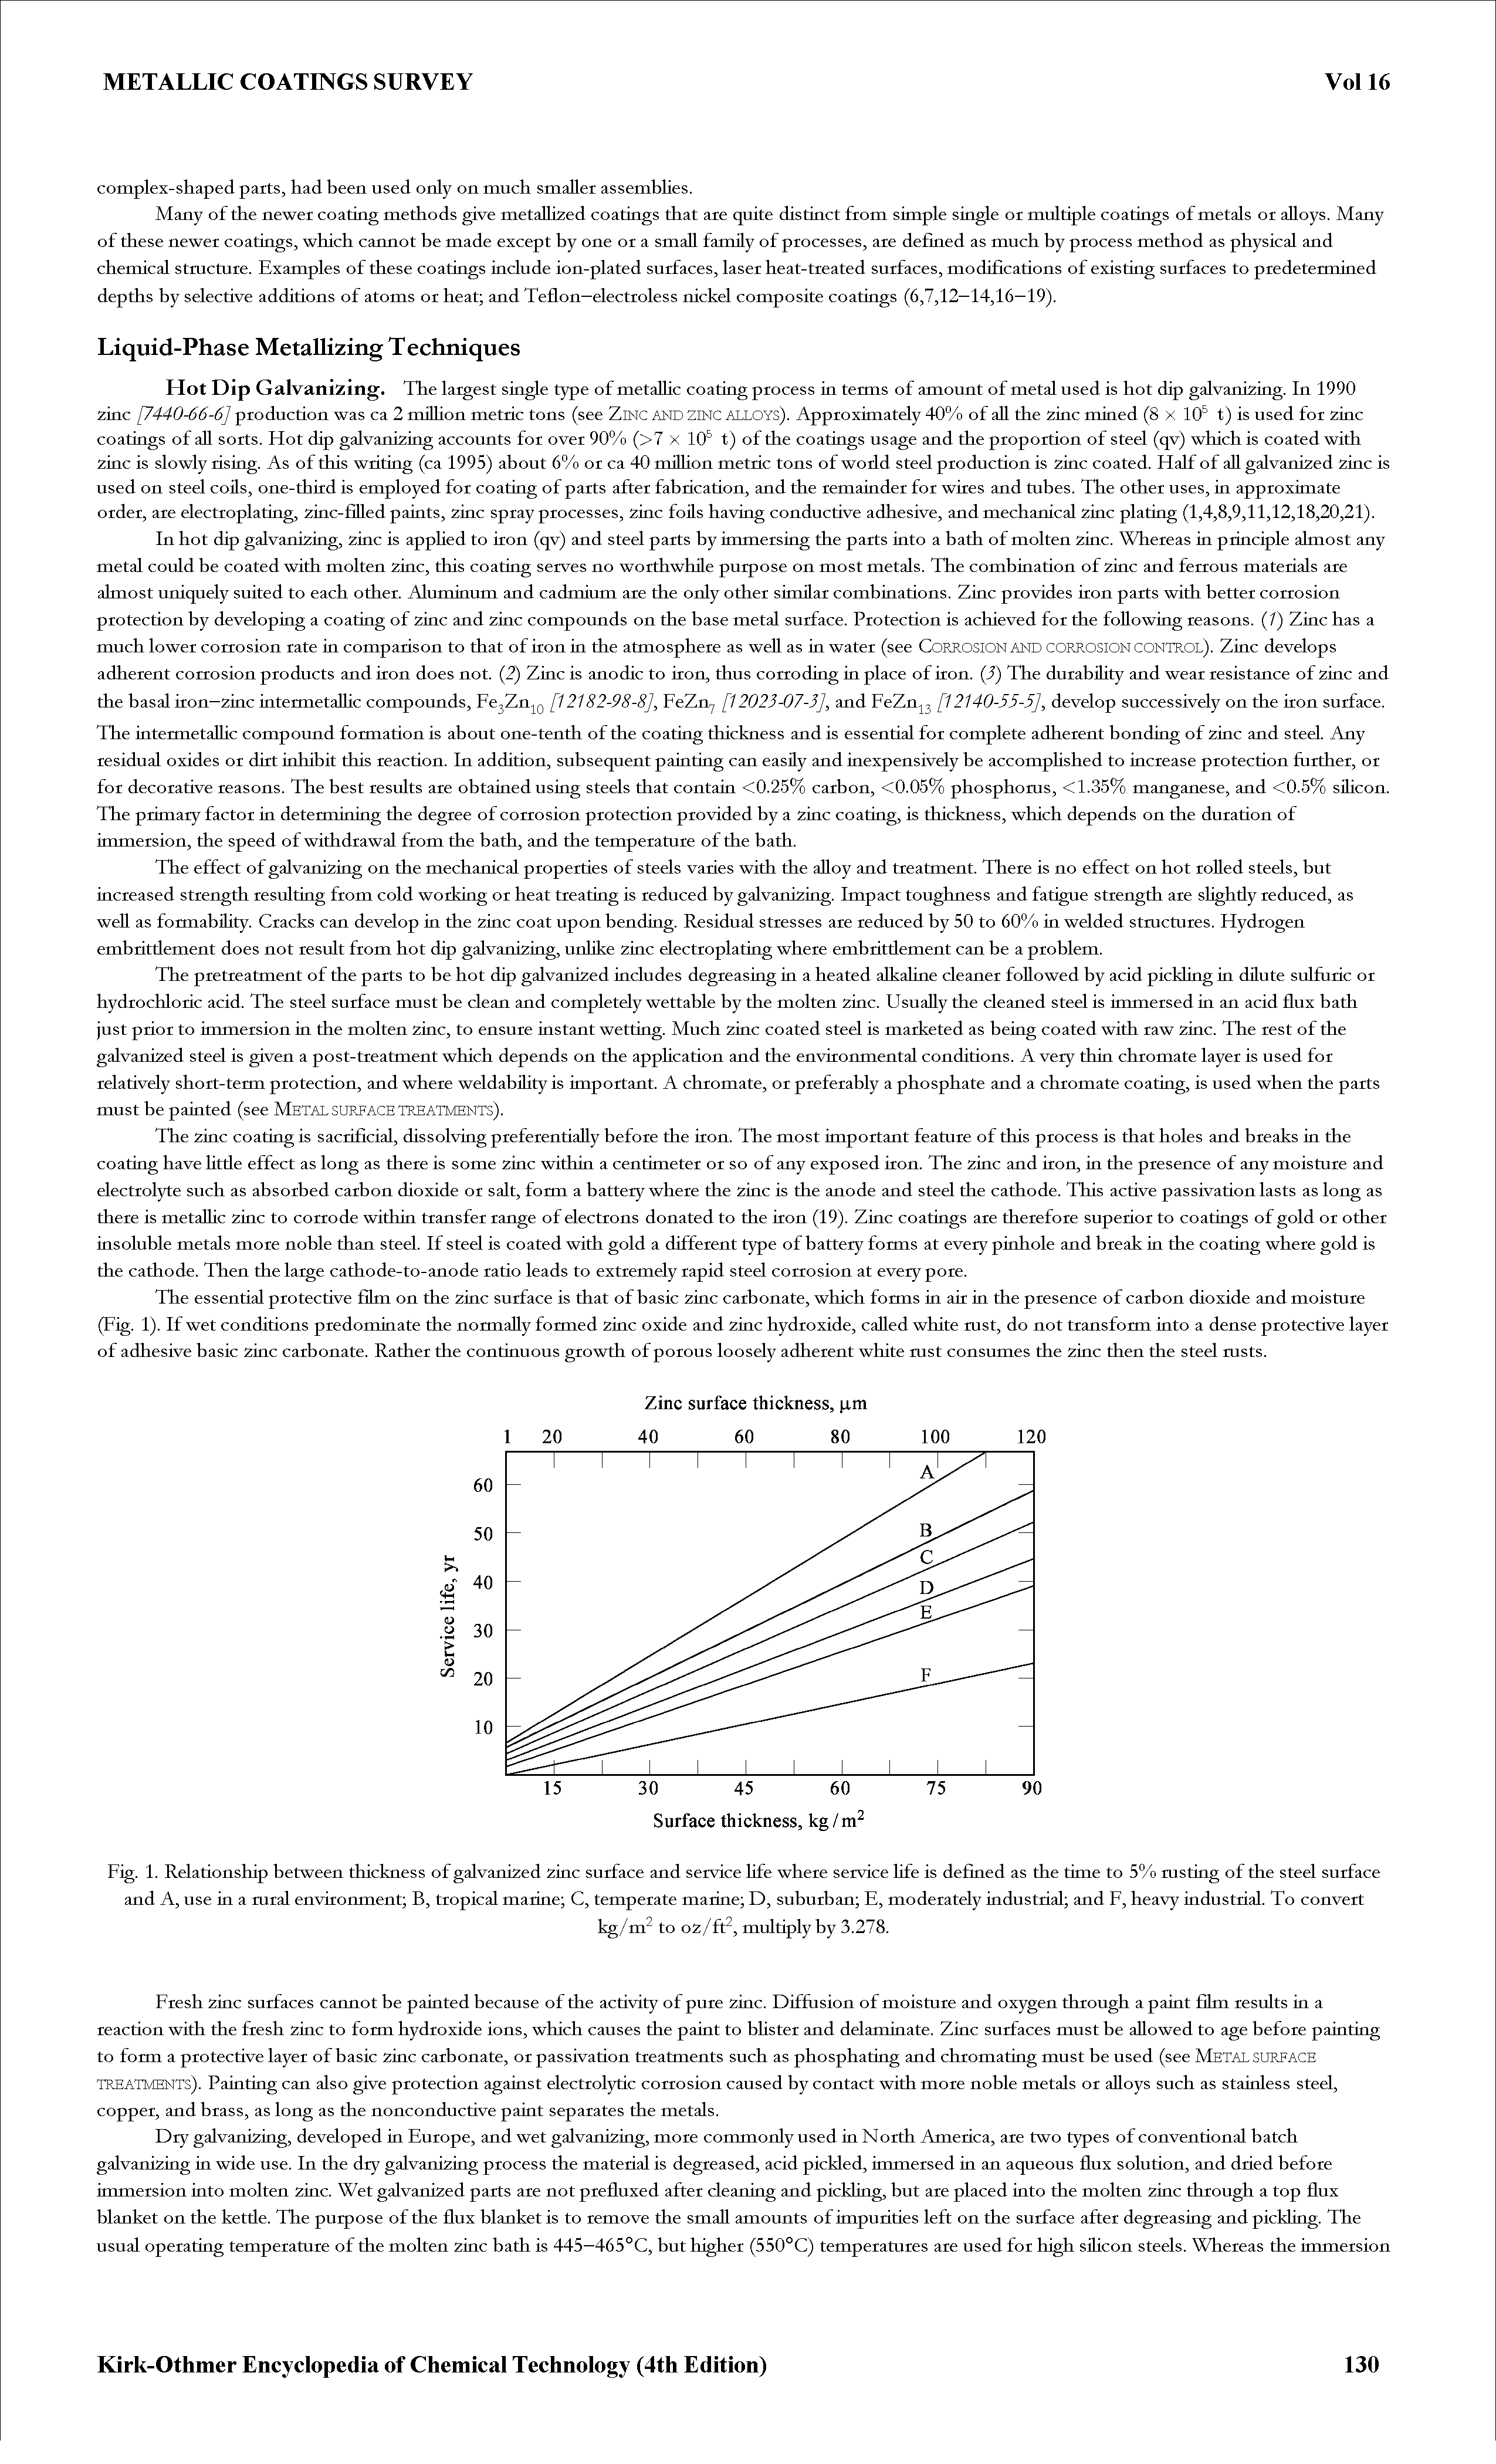 Fig. 1. Relationship between thickness of galvani2ed 2inc surface and service life where service life is defined as the time to 5% msting of the steel surface and A, use in a mral environment B, tropical marine C, temperate marine D, suburban E, moderately industrial and F, heavy industrial. To convert...